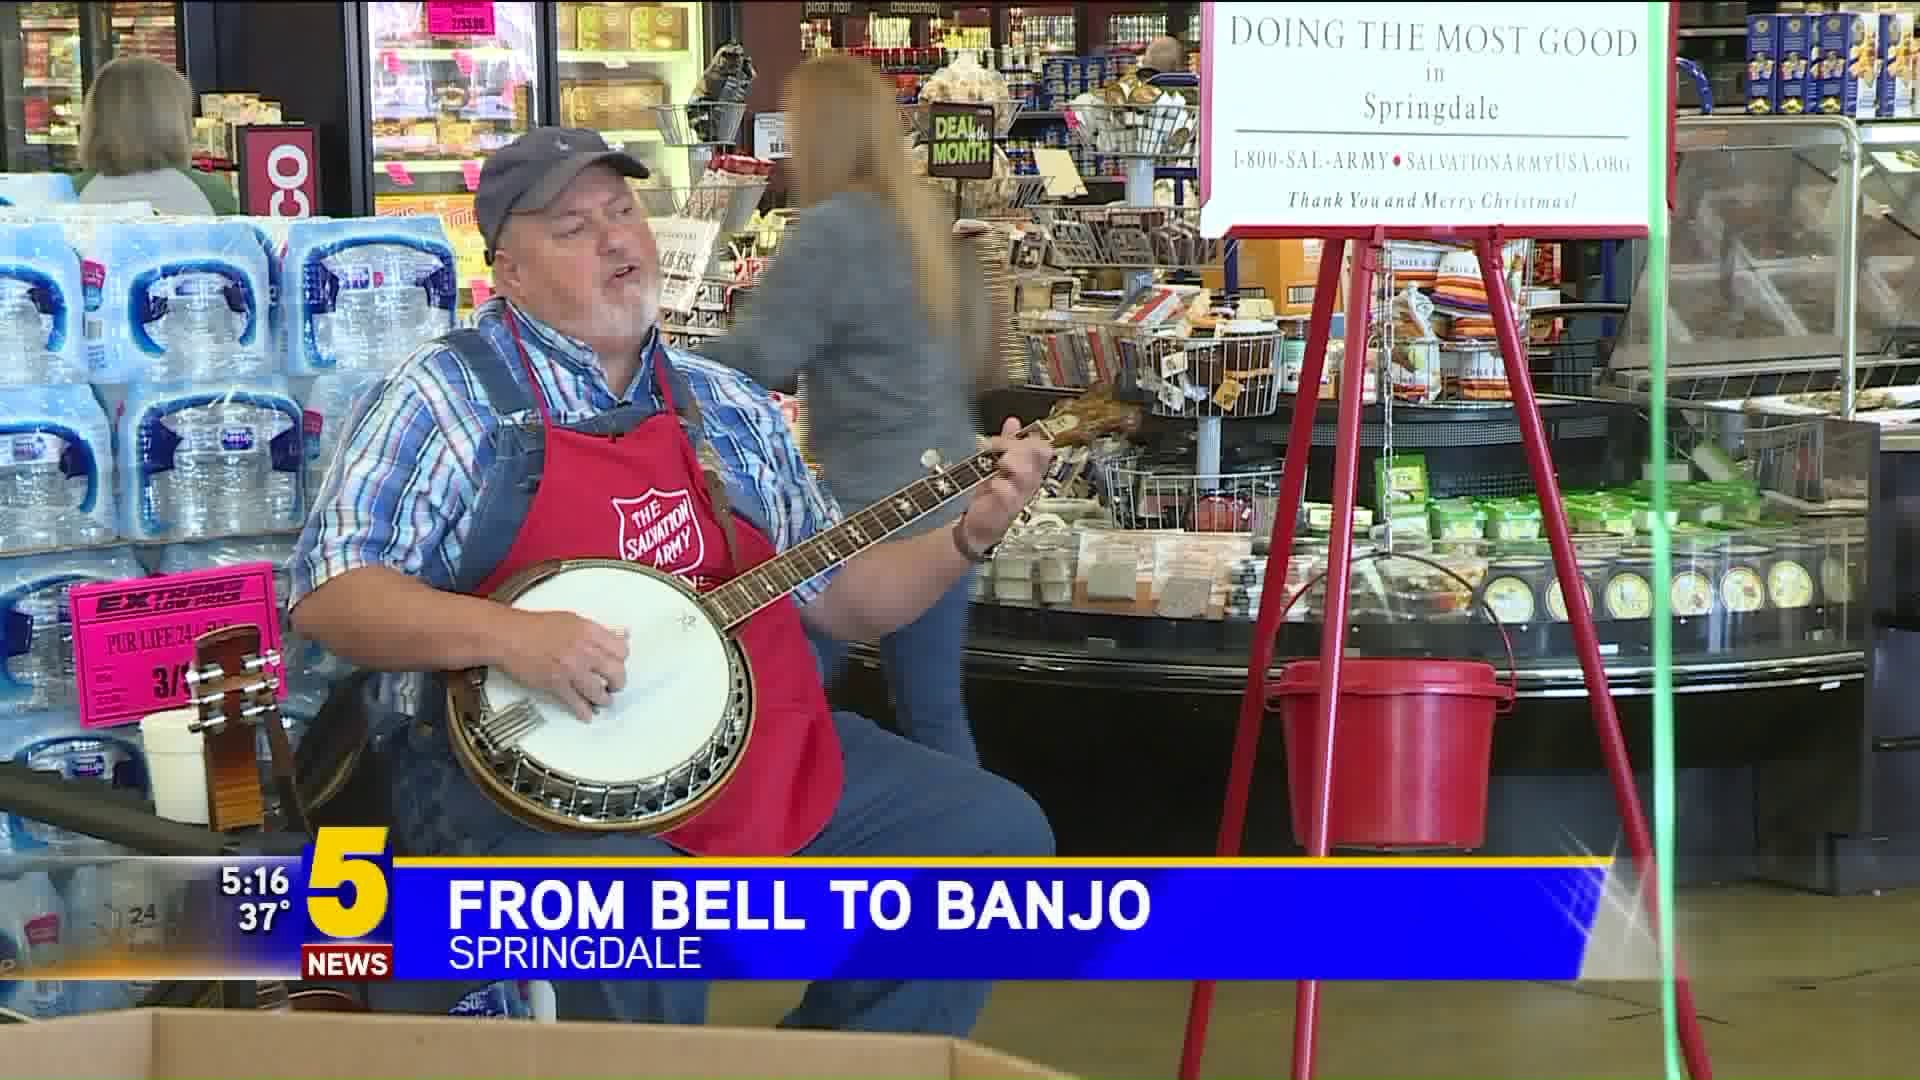 Bell to Banjo